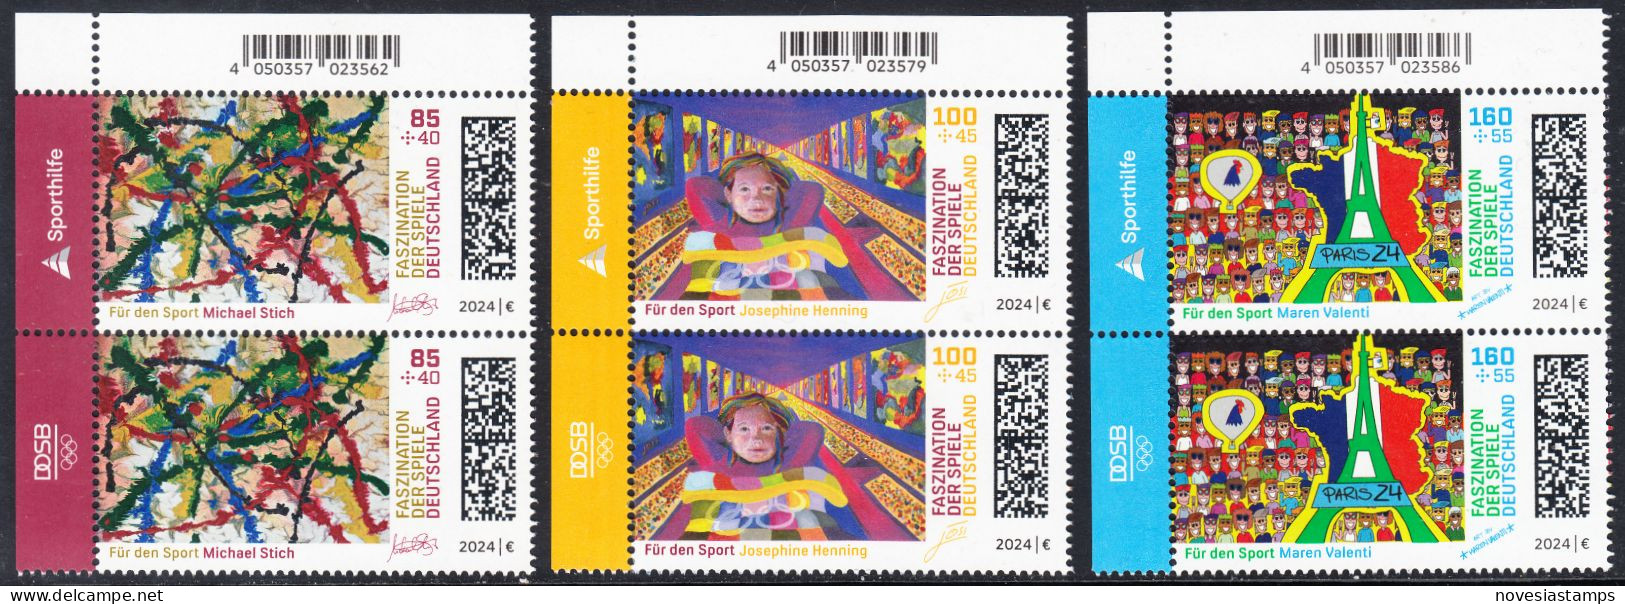 !a! GERMANY 2024 Mi. 3825-3827 MNH SET Of 3 Vert.PAIRS From Upper Left Corners - Olympic Games 2024, Paris - Nuovi